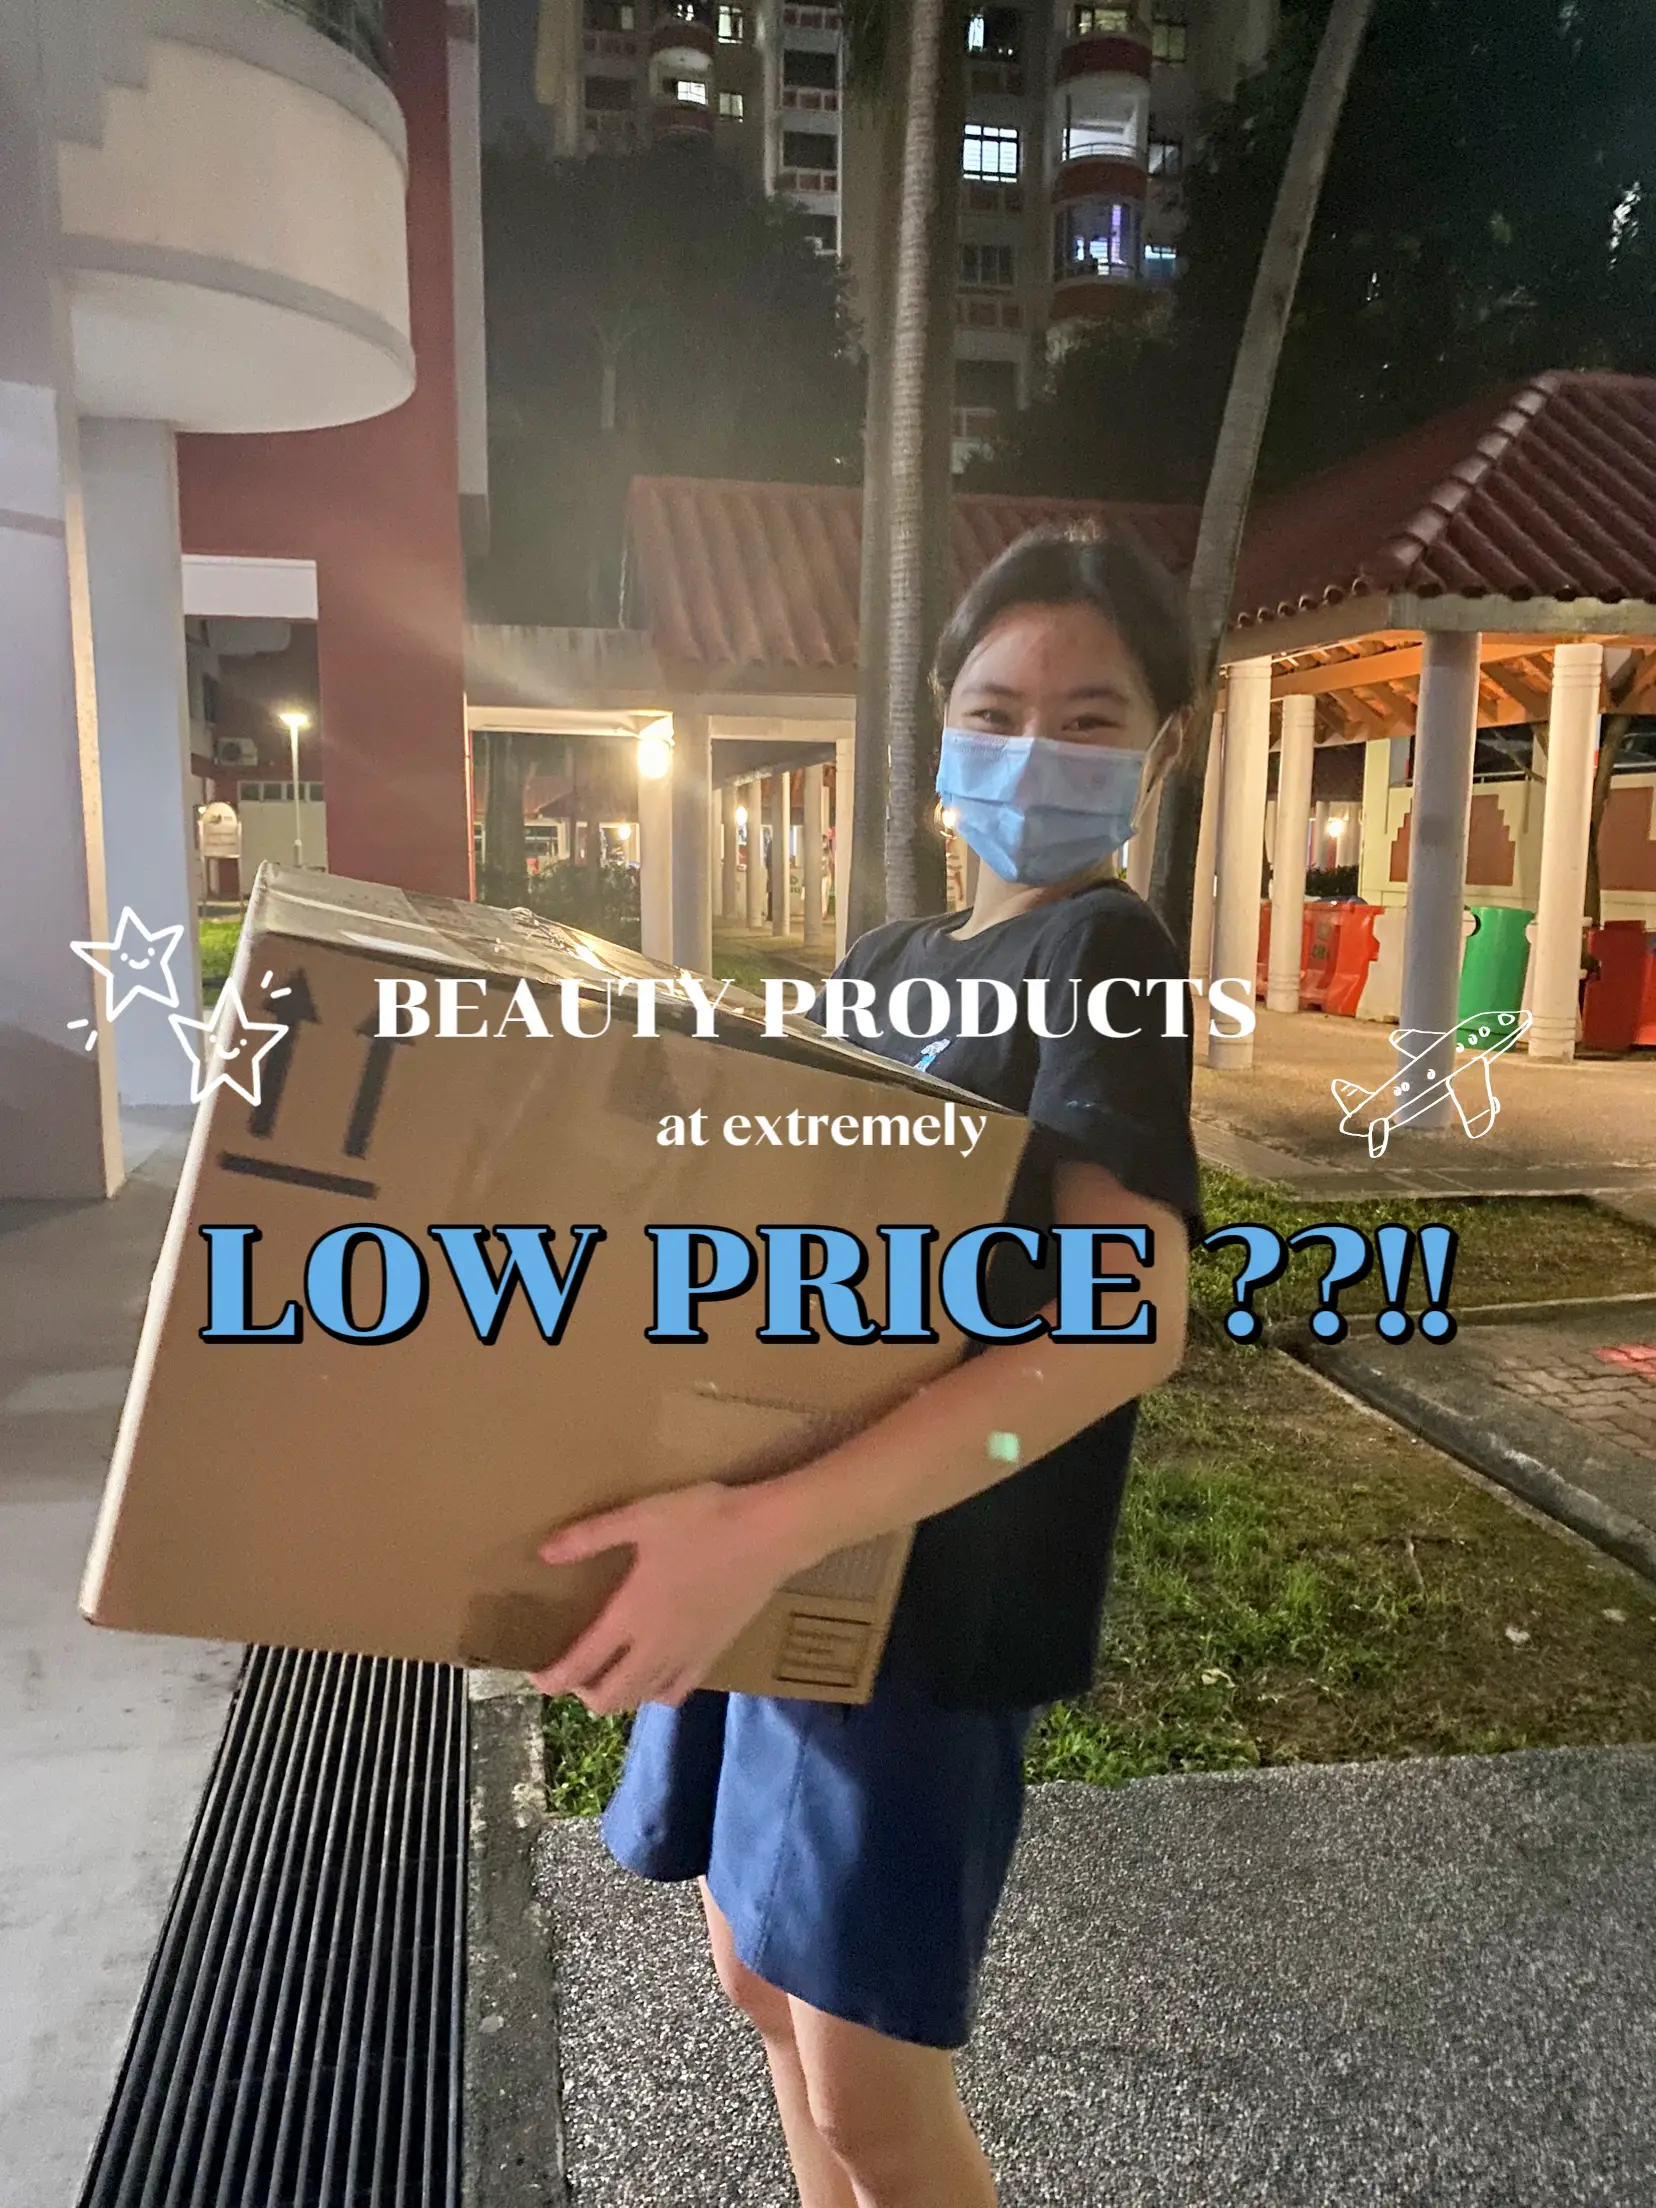 Beauty products at LOW price?! FAKE one is it 😏